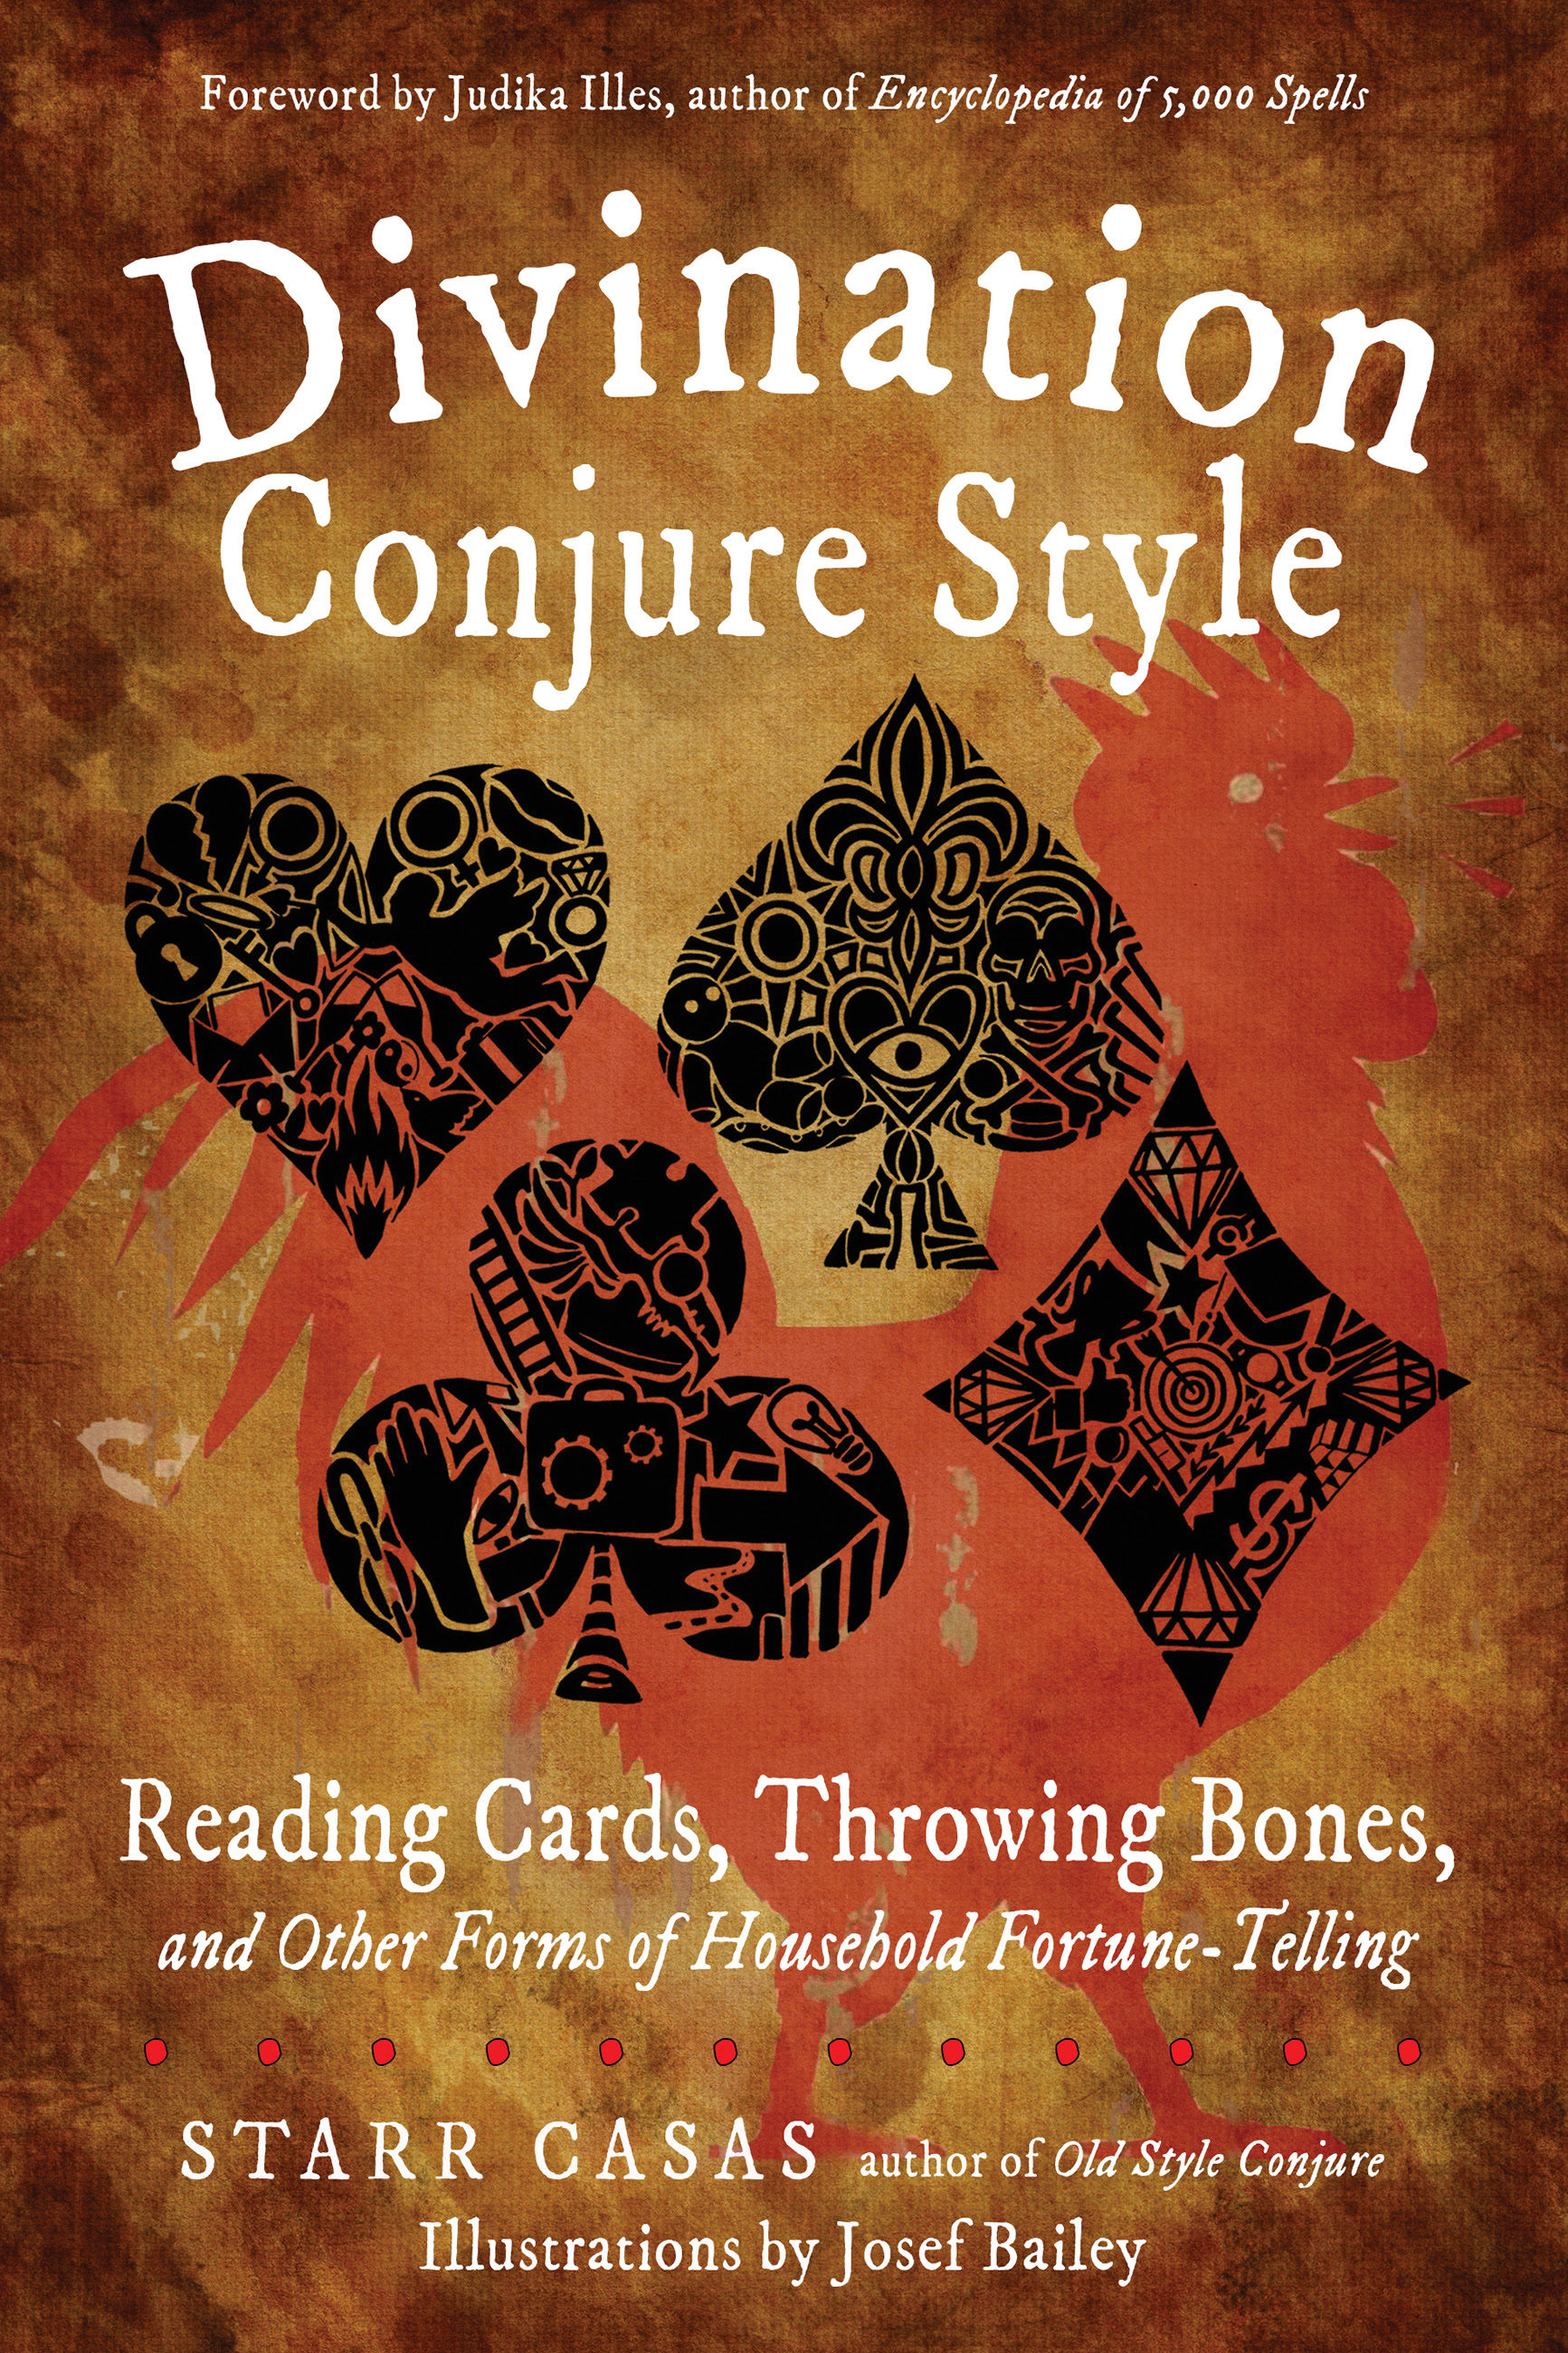 Divination Conjure Style: Reading Cards, Throwing Bones, and Other Forms of Household Fortune-Telling EPUB